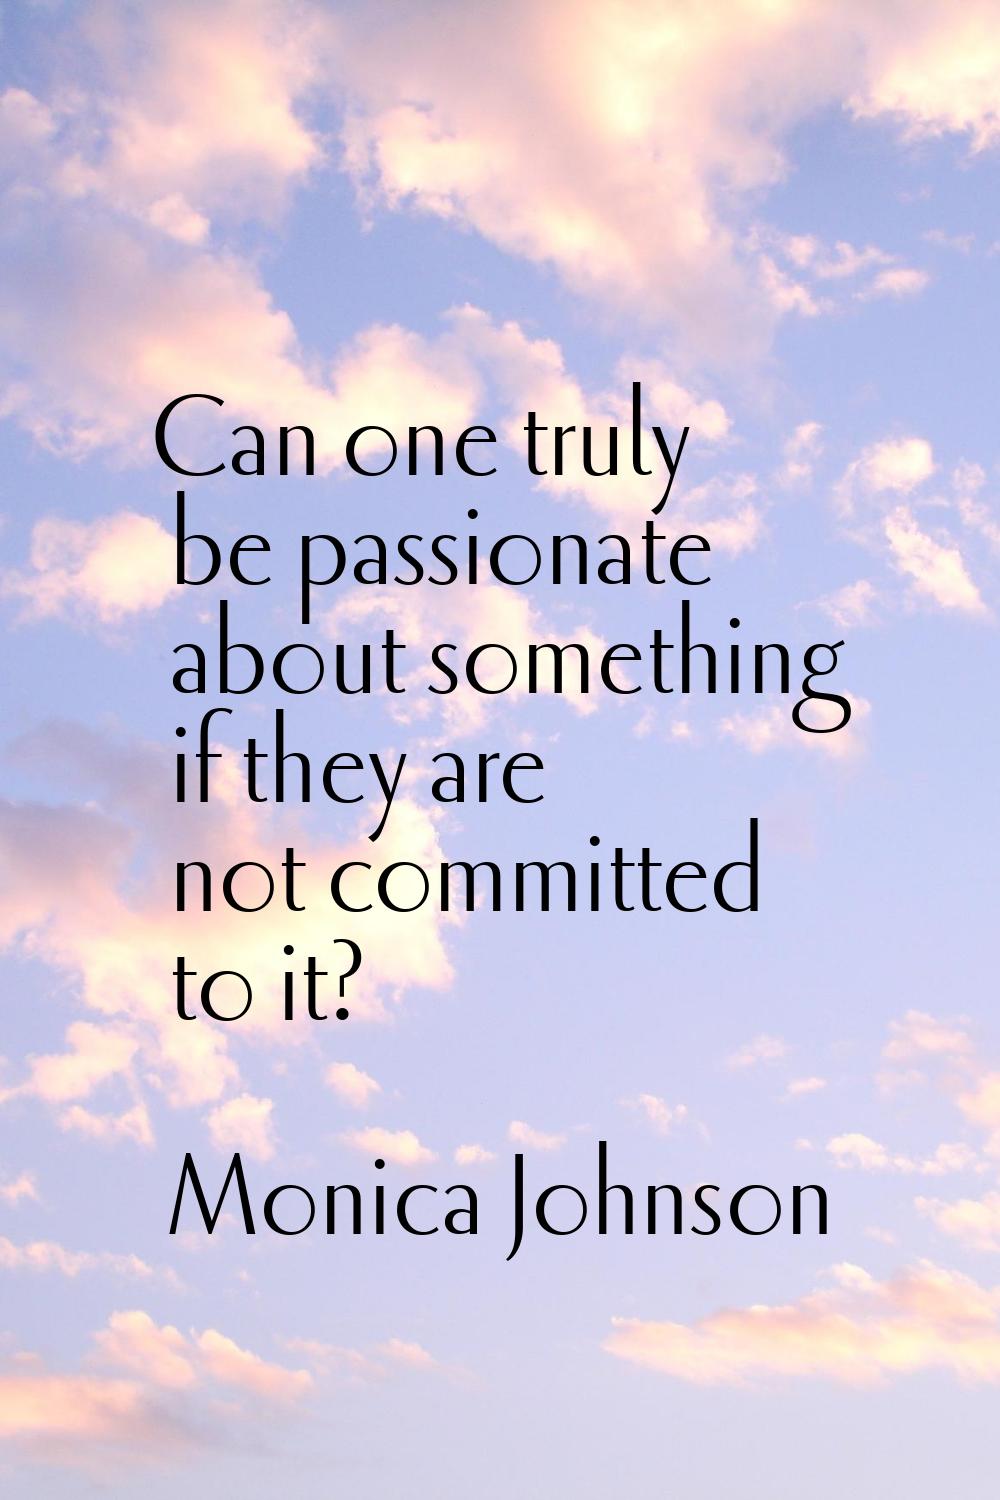 Can one truly be passionate about something if they are not committed to it?